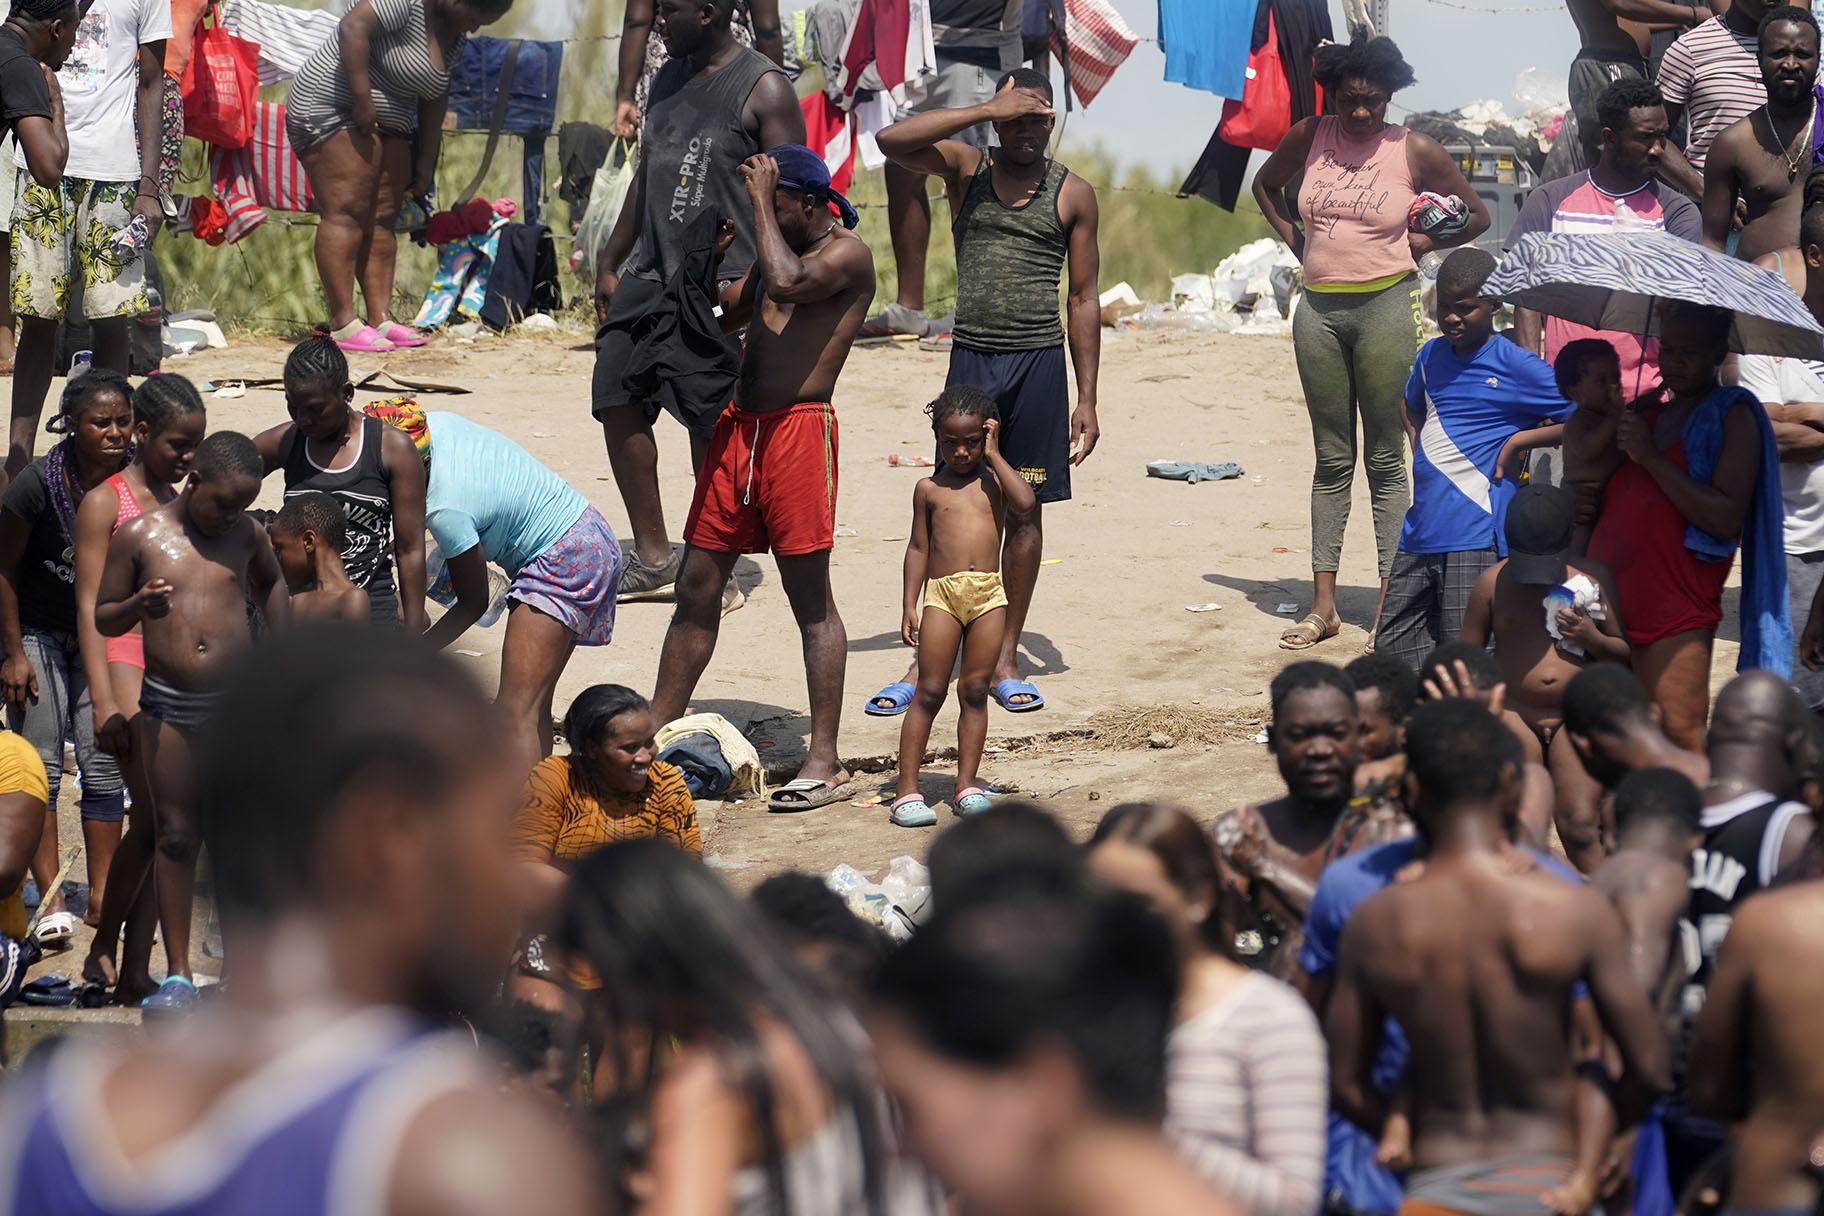 Haitian migrants gather on the banks of the Rio Grande after they crossed into the United States from Mexico, Saturday, Sept. 18, 2021, in Del Rio, Texas. (AP Photo / Eric Gay)